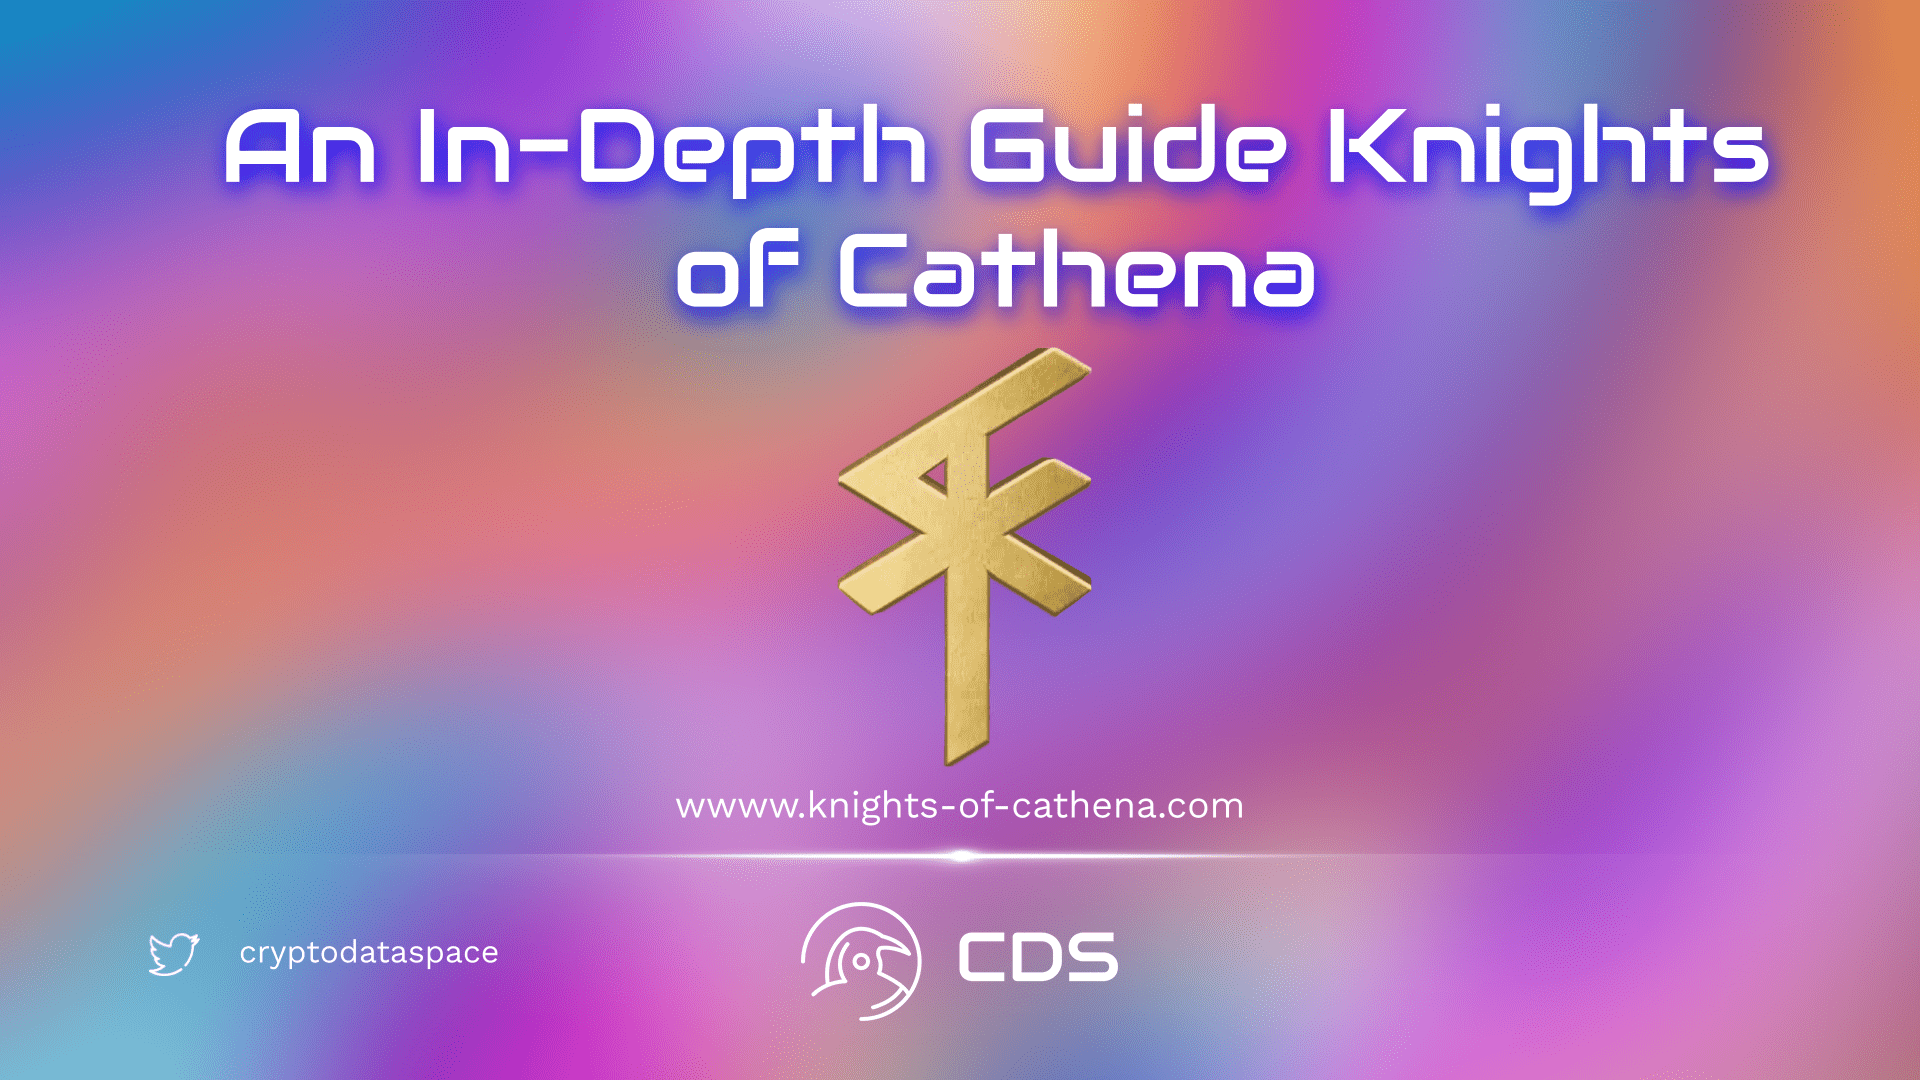 An In-Depth Guide Knights of Cathena